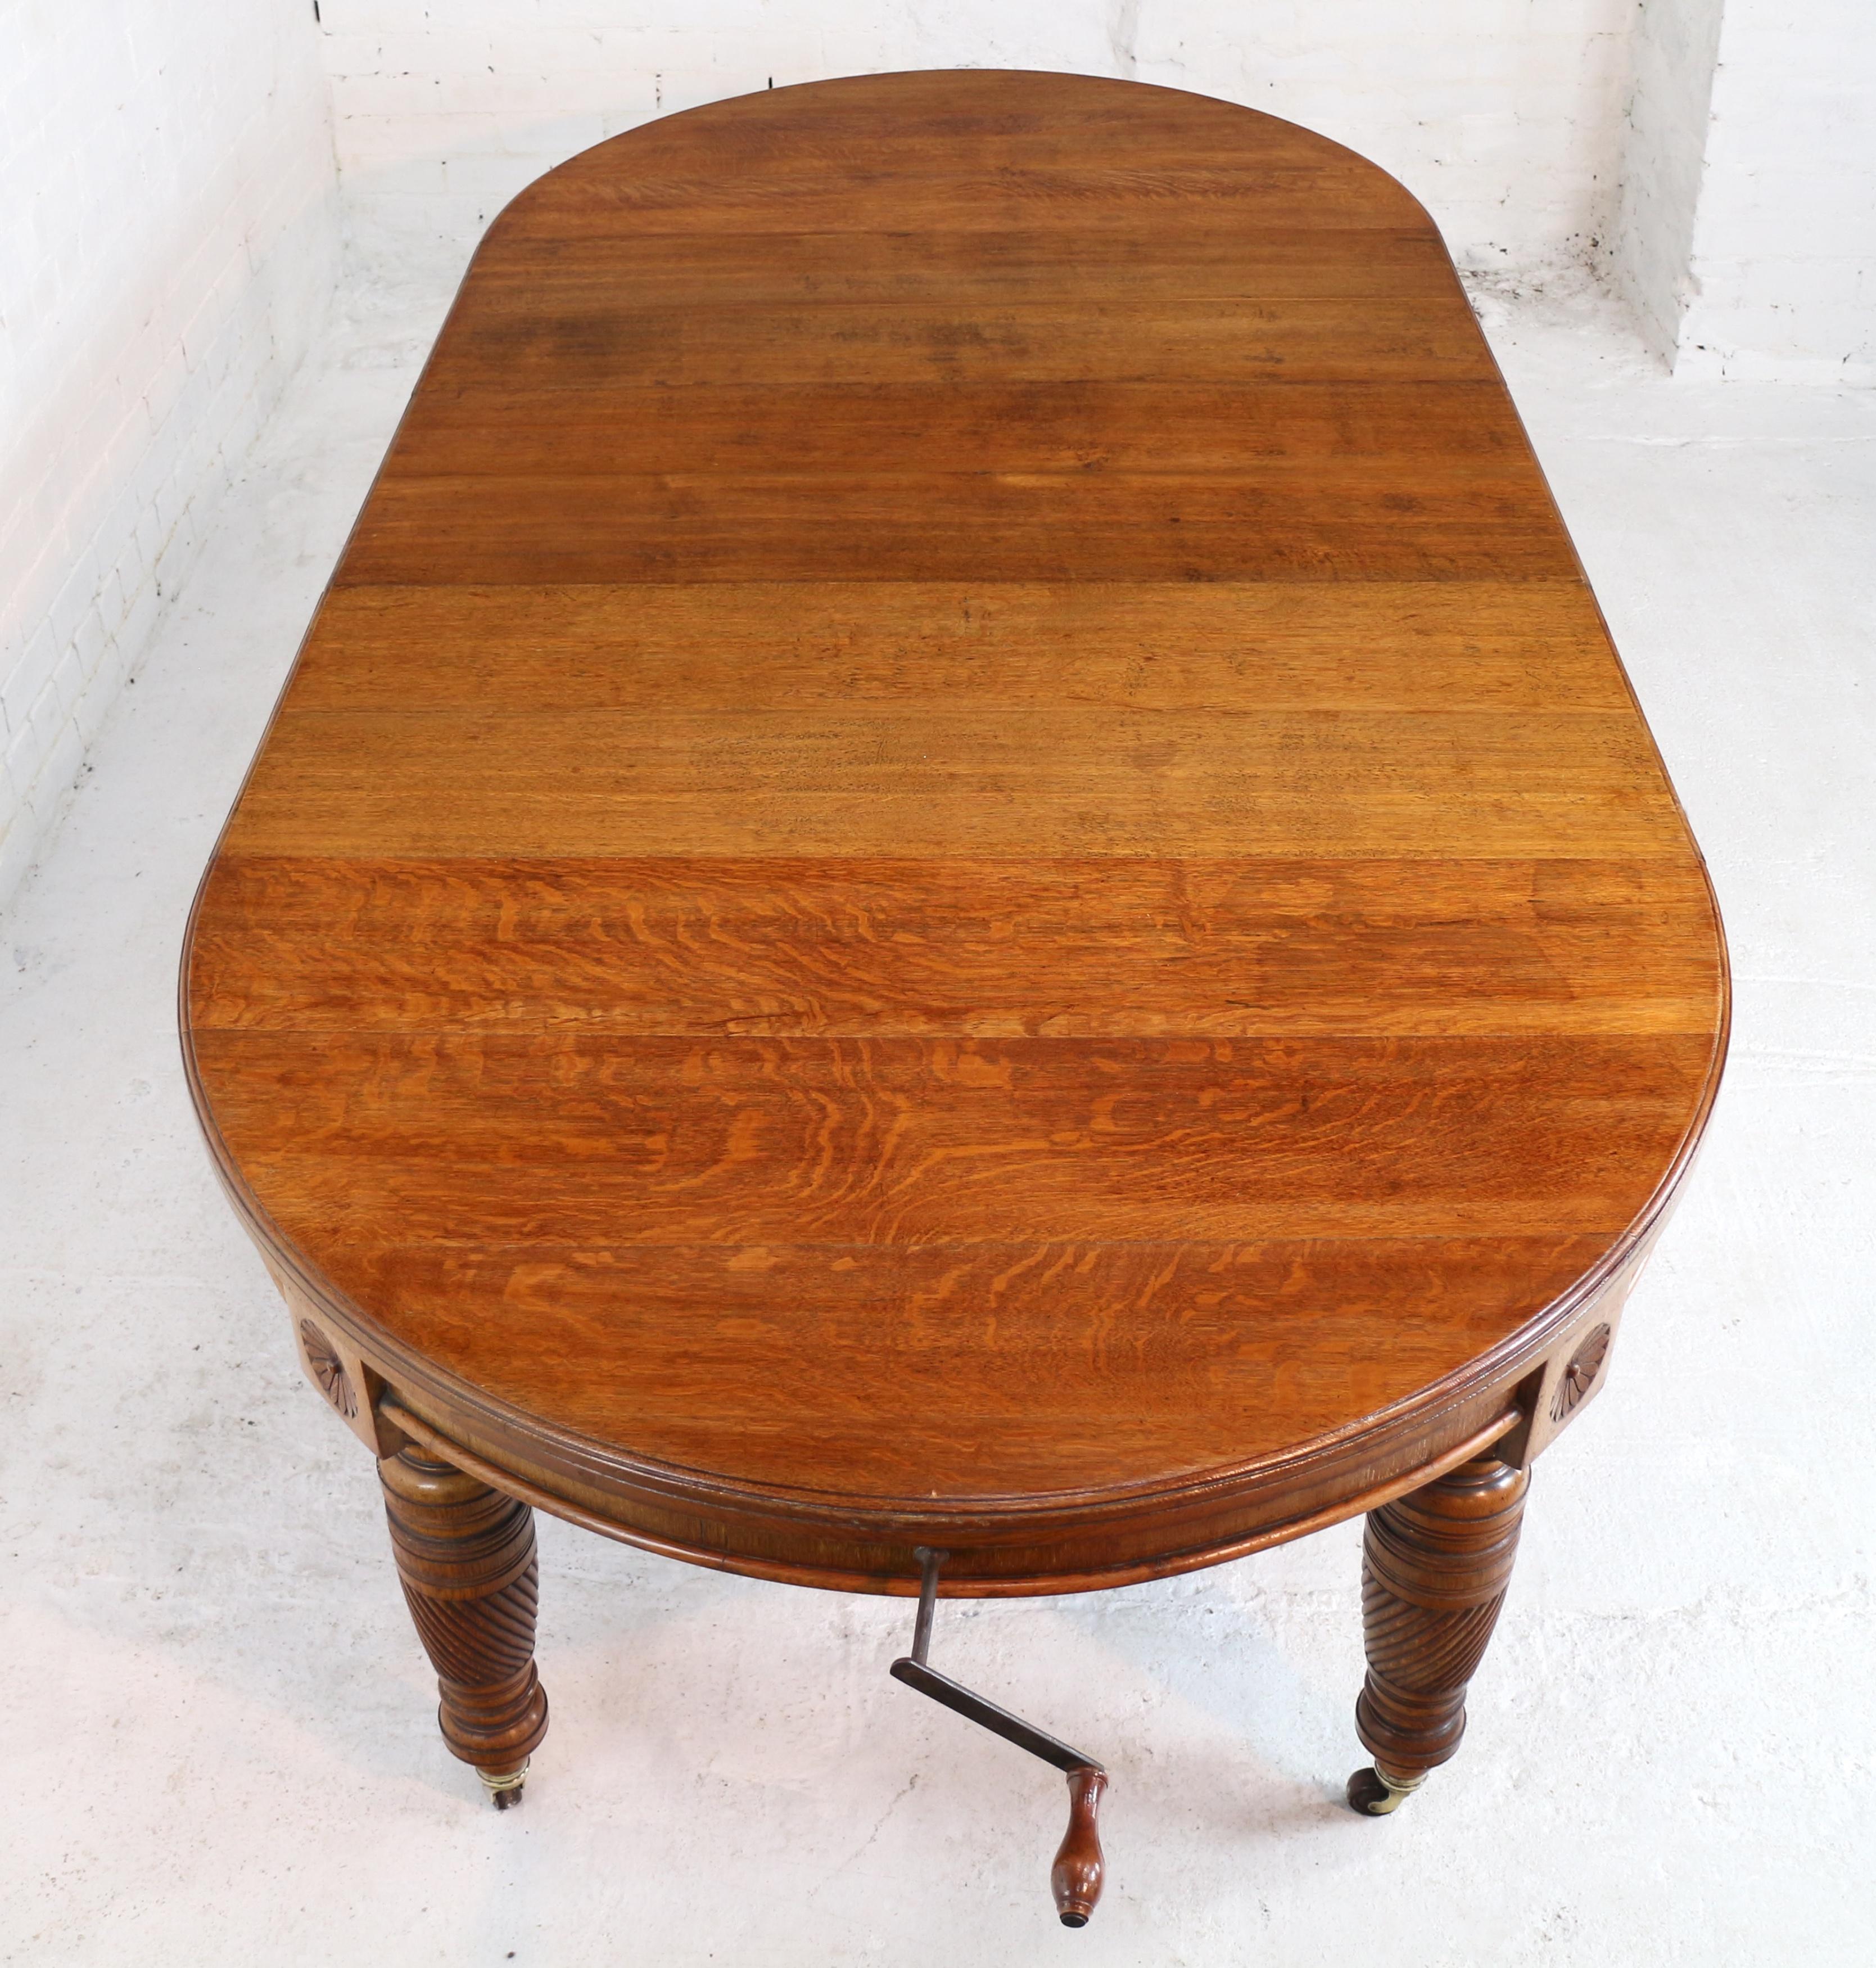 19th Century Antique English Victorian Maple & Co. Oak Campaign Dining Table and Leaf Holder